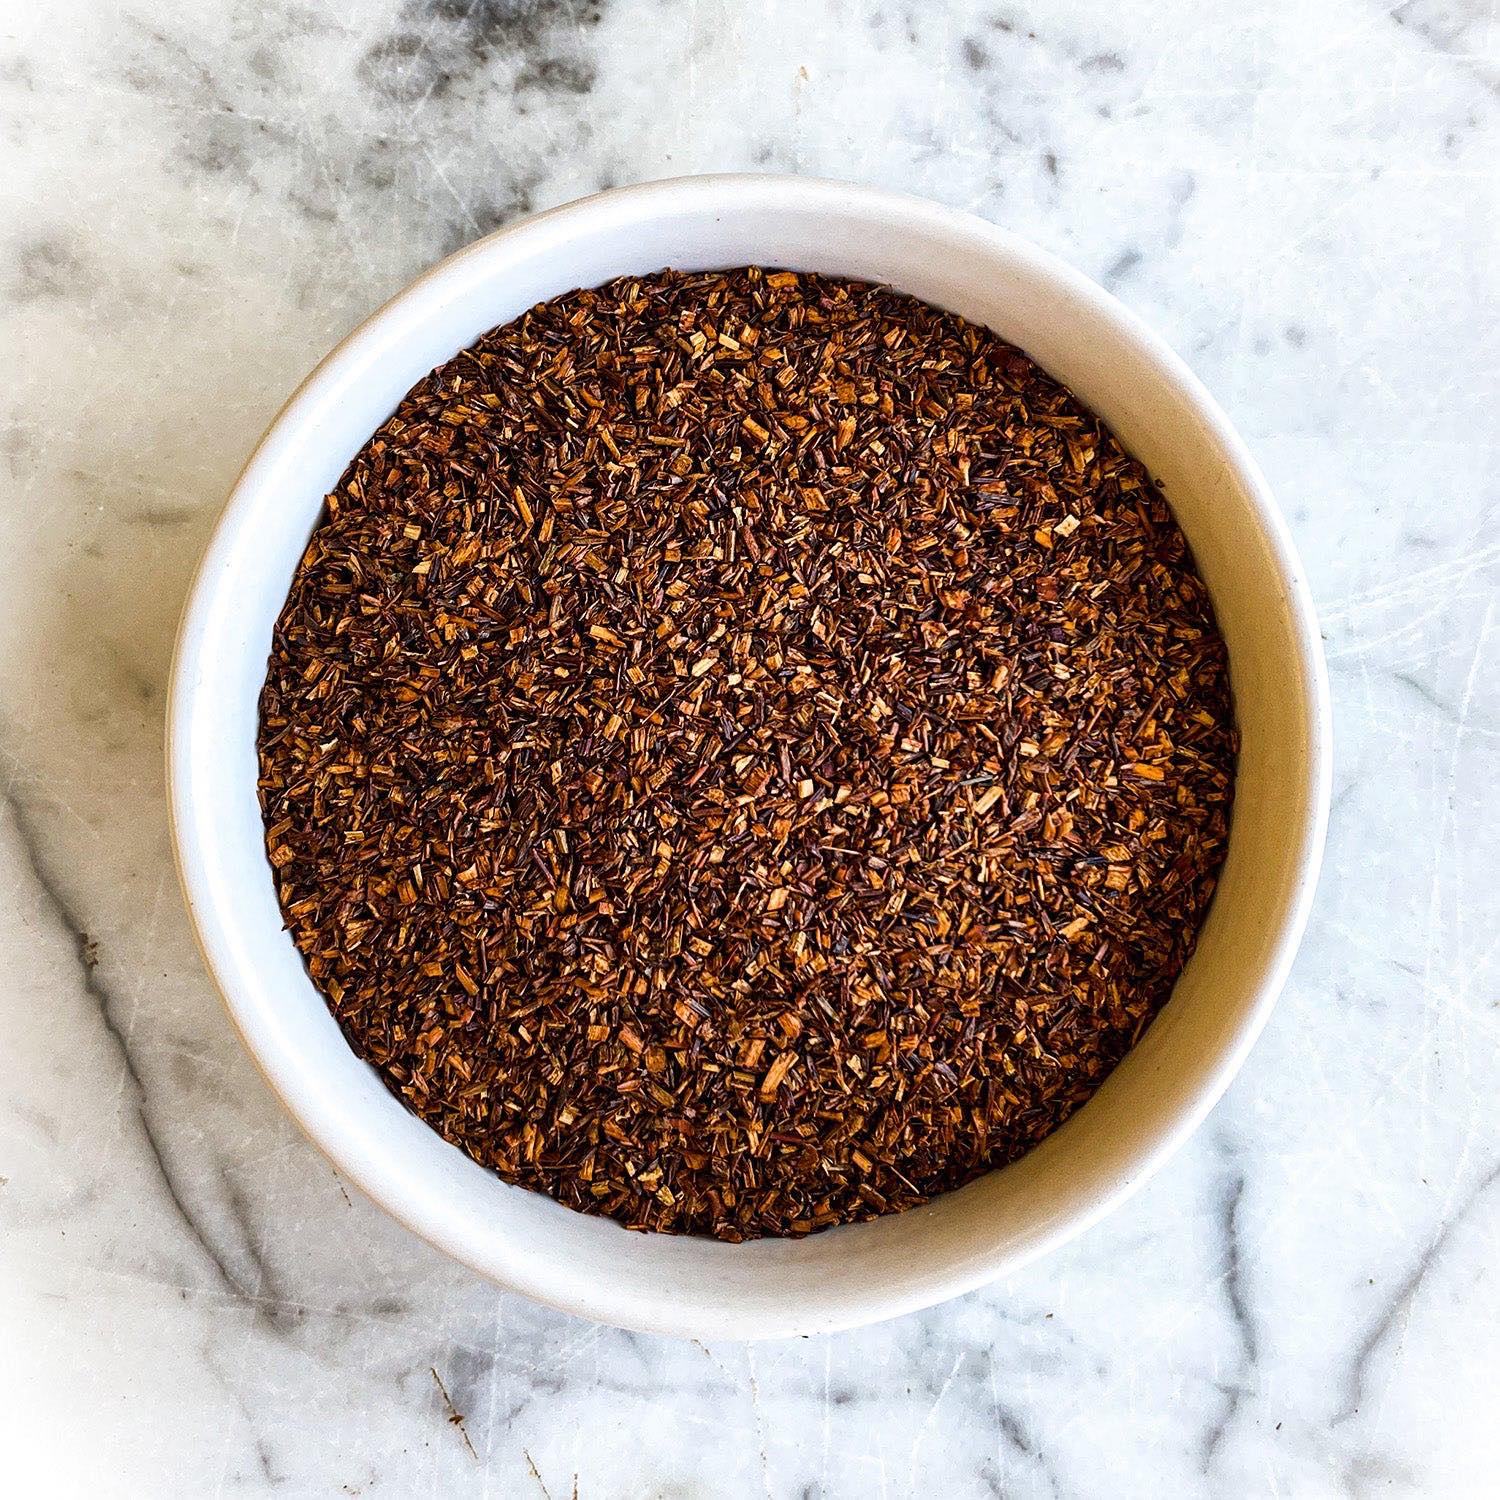 Dried red rooibos tea is featured in a white bowl on a white marble tabletop.